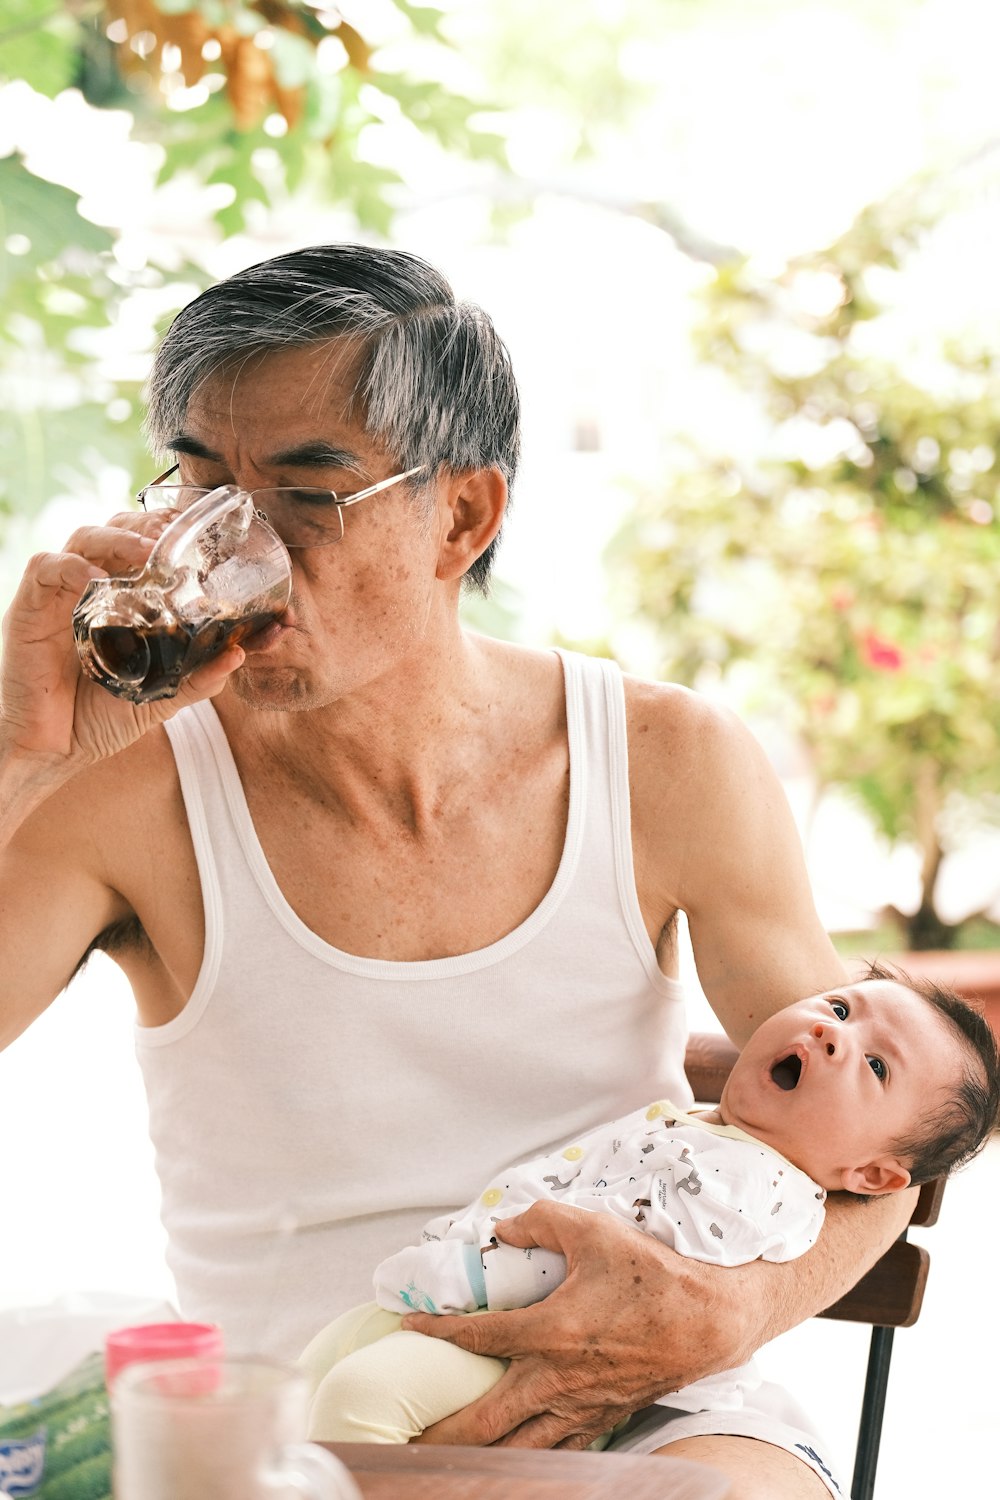 a man holding a baby drinking from a bottle